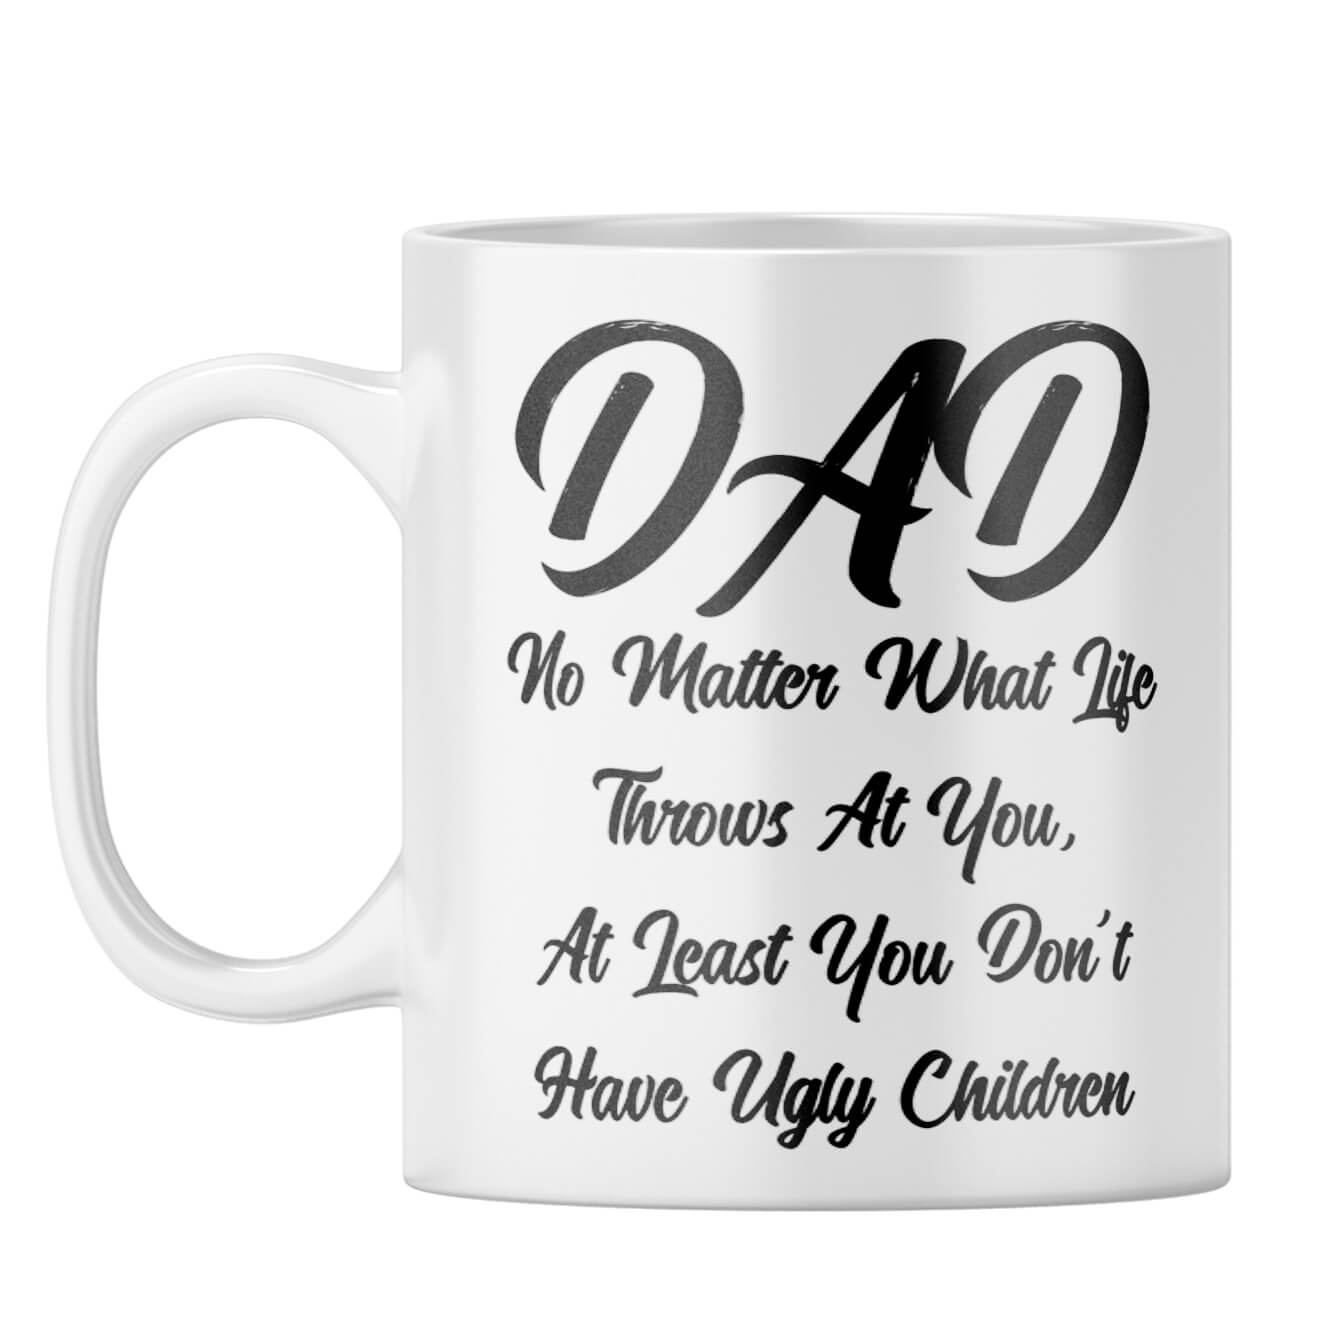 Dad Doesn't Have Ugly Children Coffee Mug White